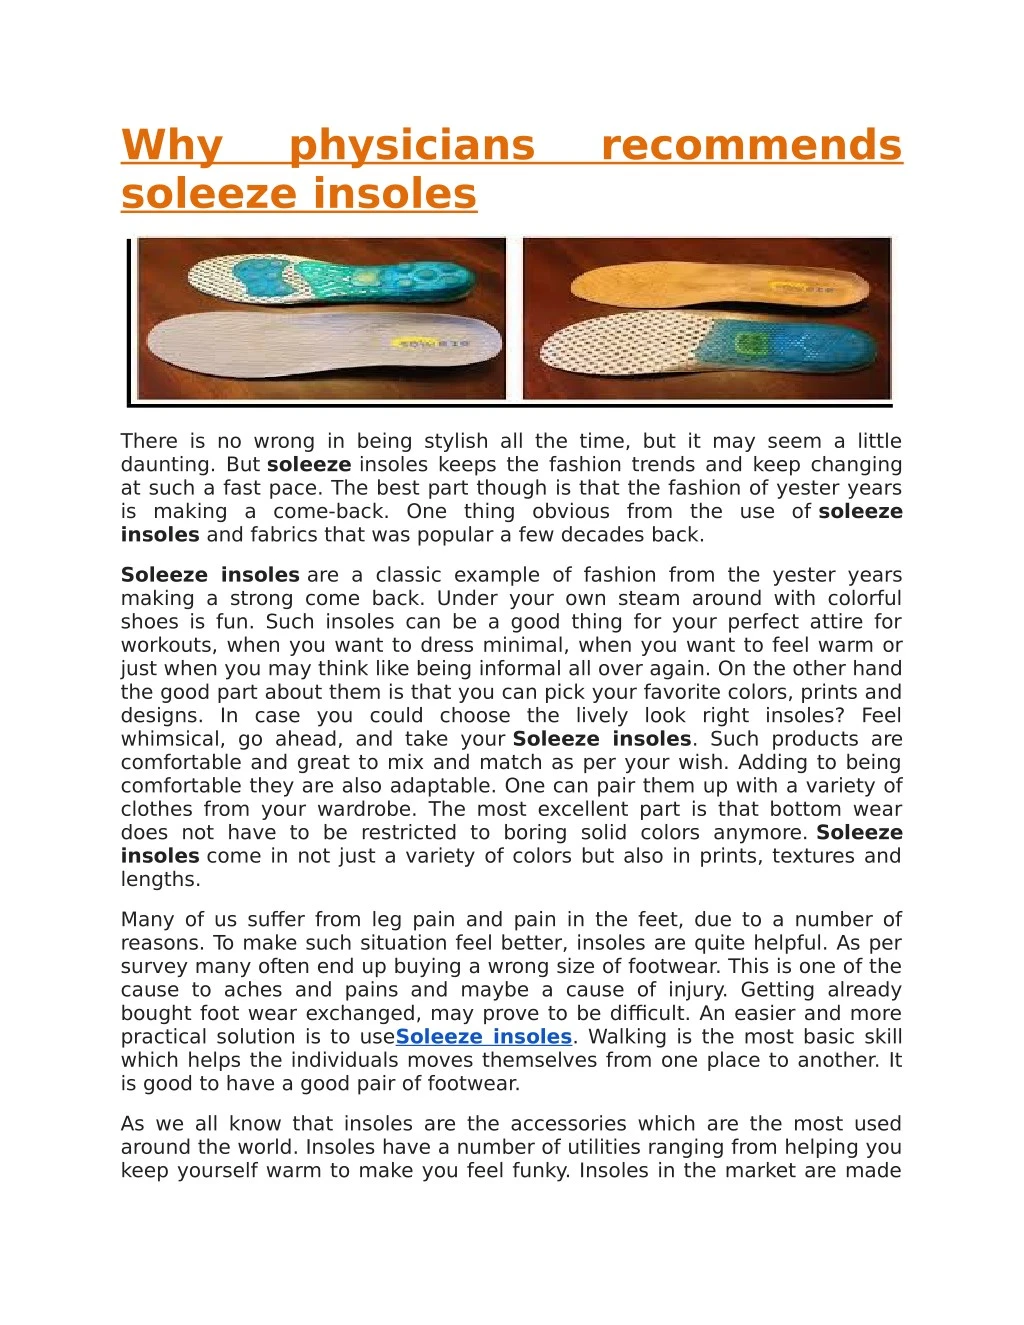 why physicians recommends soleeze insoles